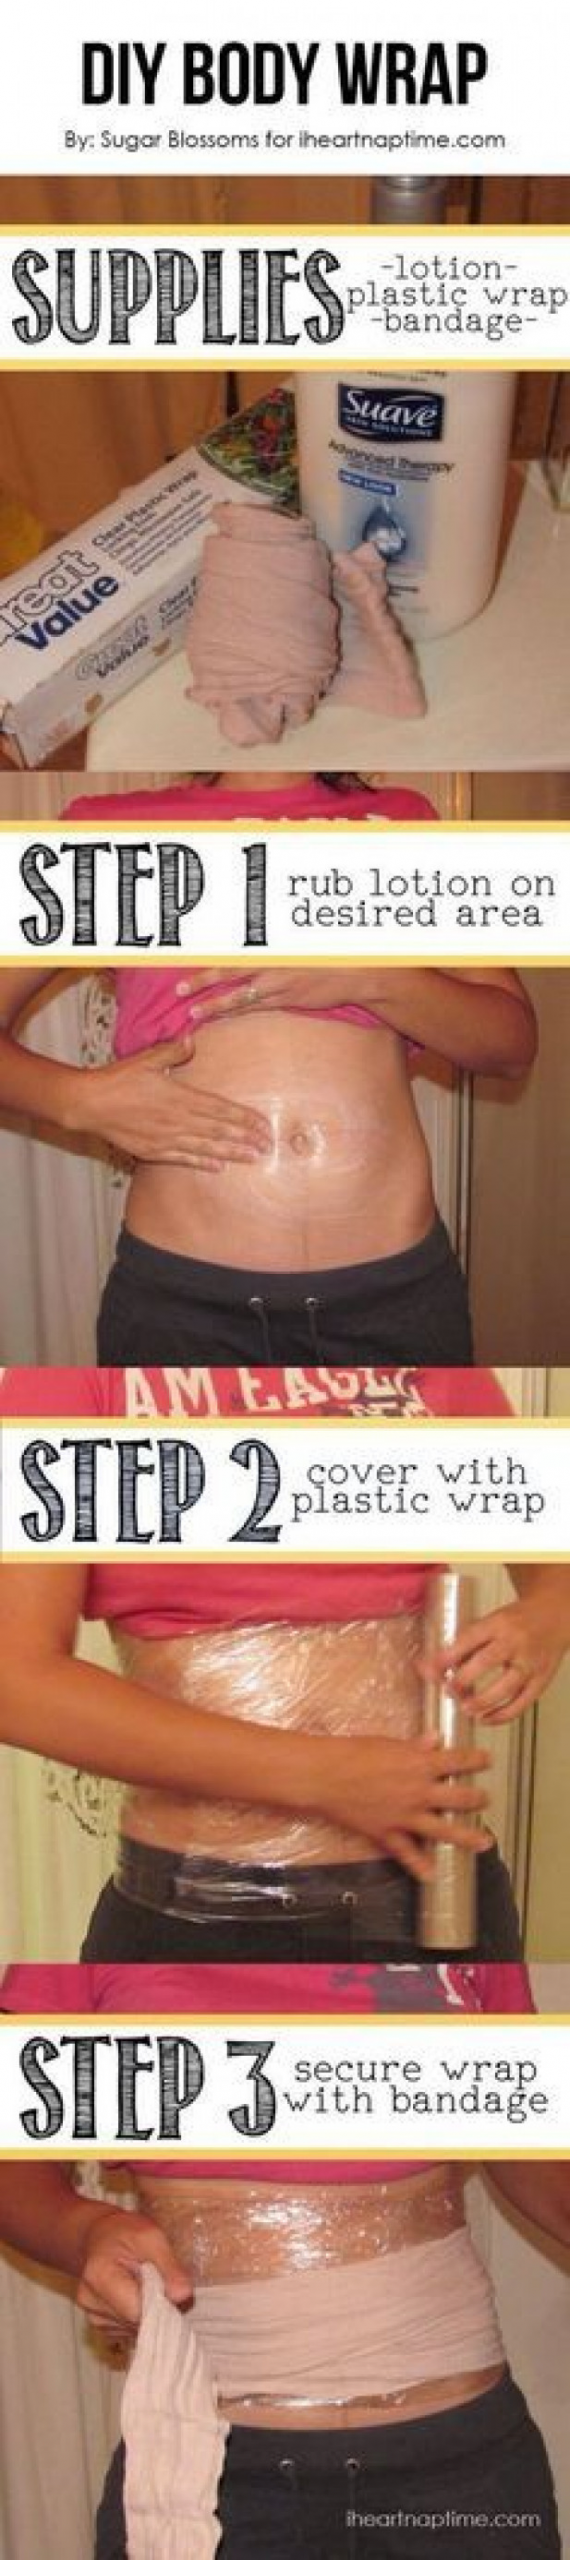 How To Lose Belly Fat With Plastic Wrap
 LOSE UP to 1 2 inches overnight Step 1 Apply a thick